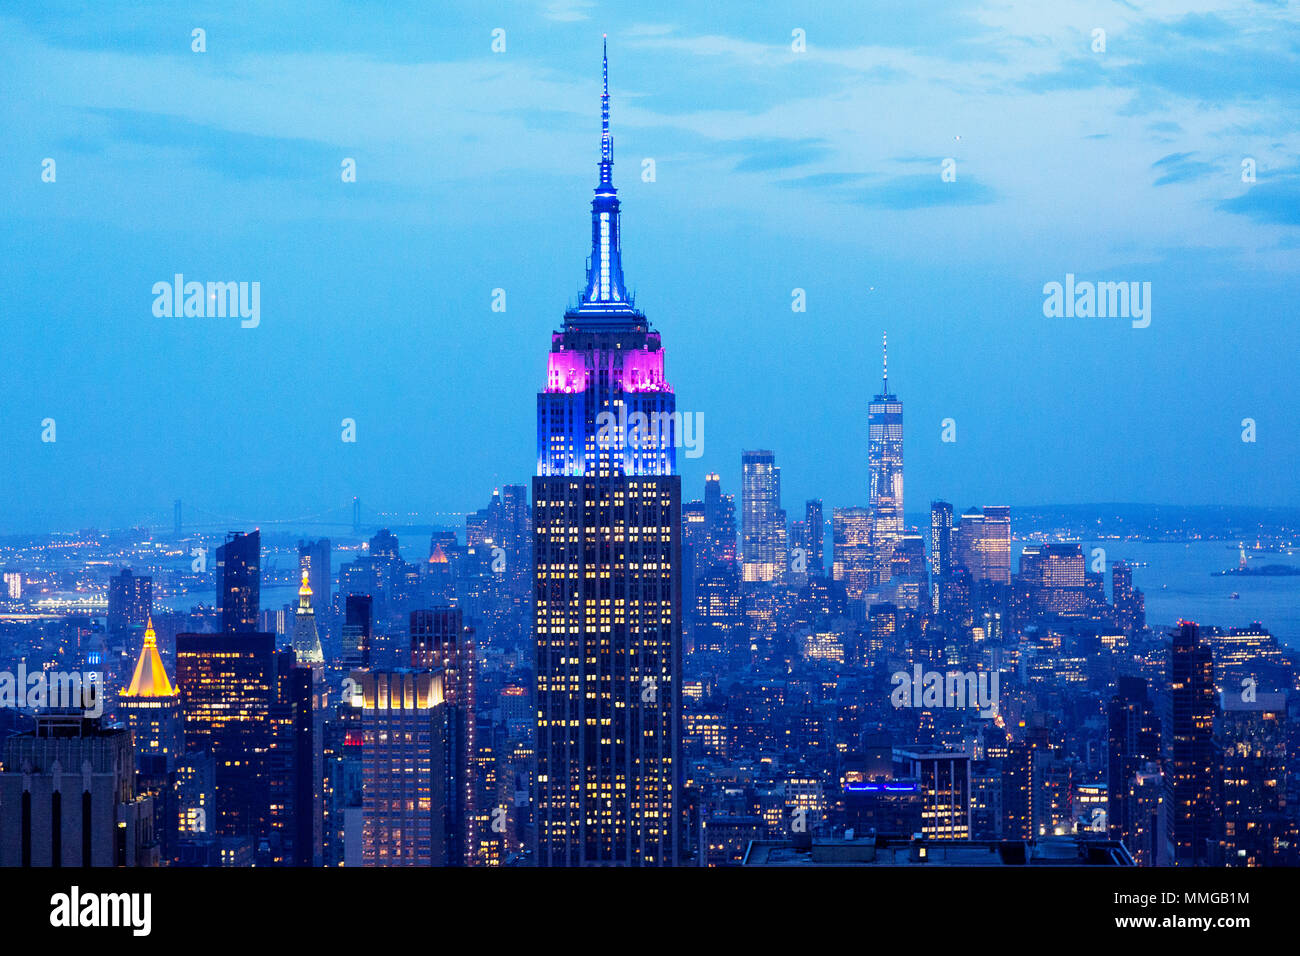 Empire State Building and New York skyline at dusk, seen from the Top of the Rock viewing platform, Manhattan, New York city, United States of America Stock Photo